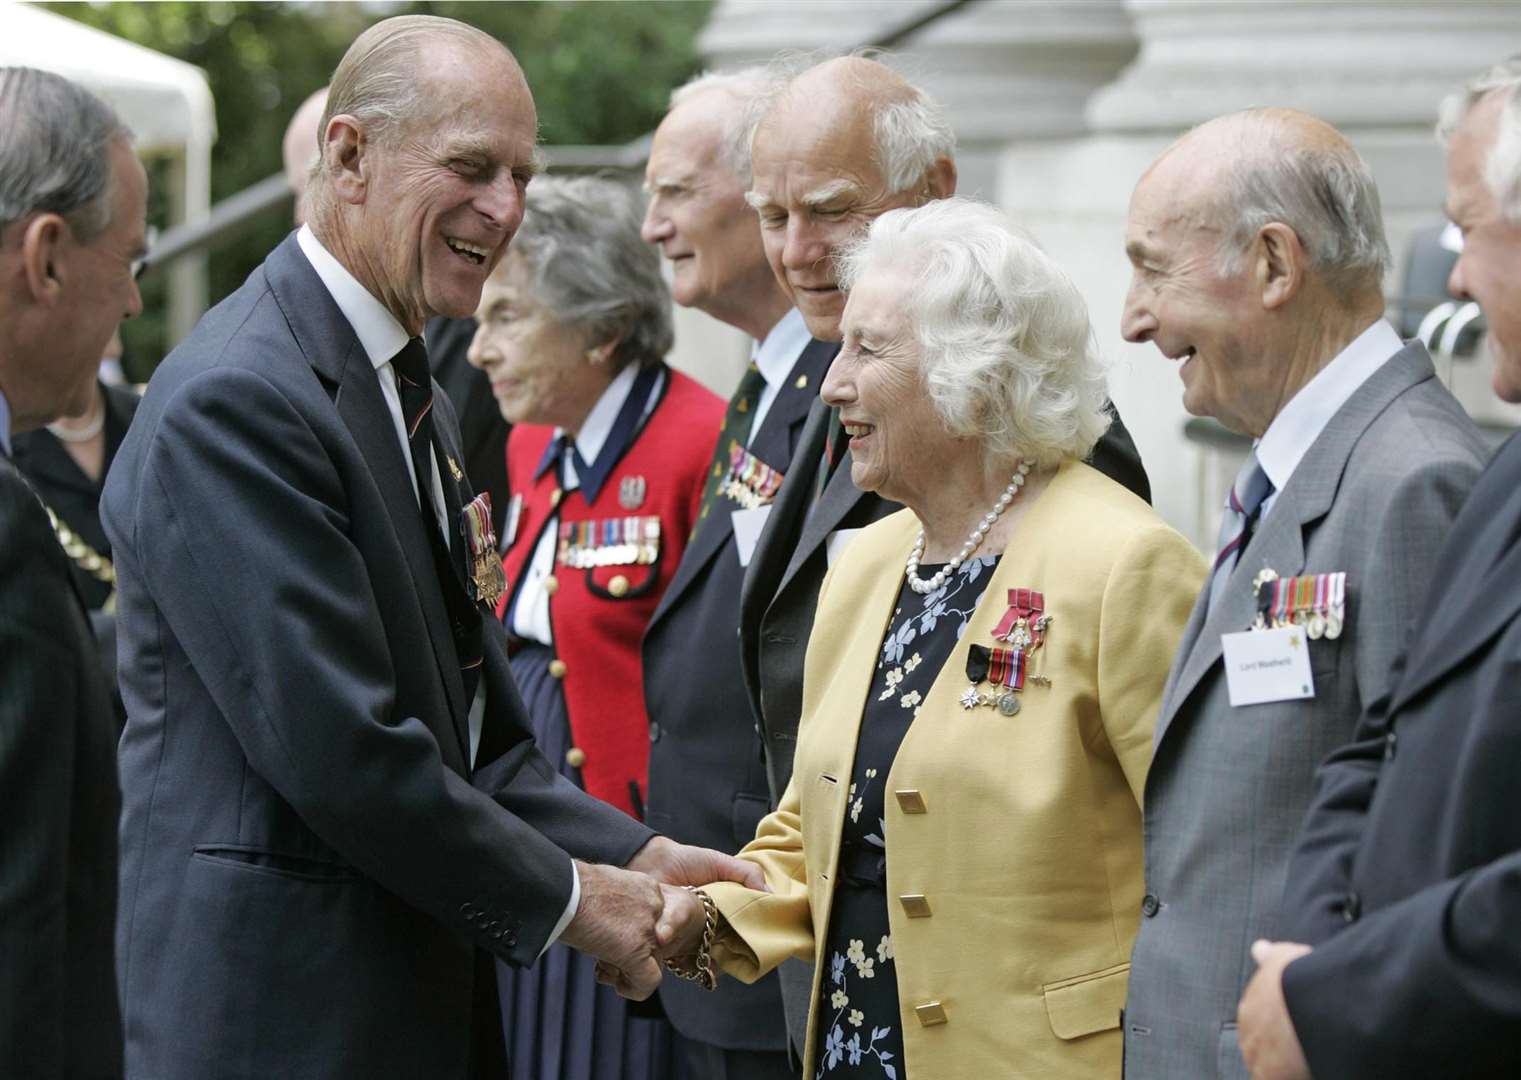 The Duke of Edinburgh shakes the hand of Dame Vera at a service in 2005 (PA)